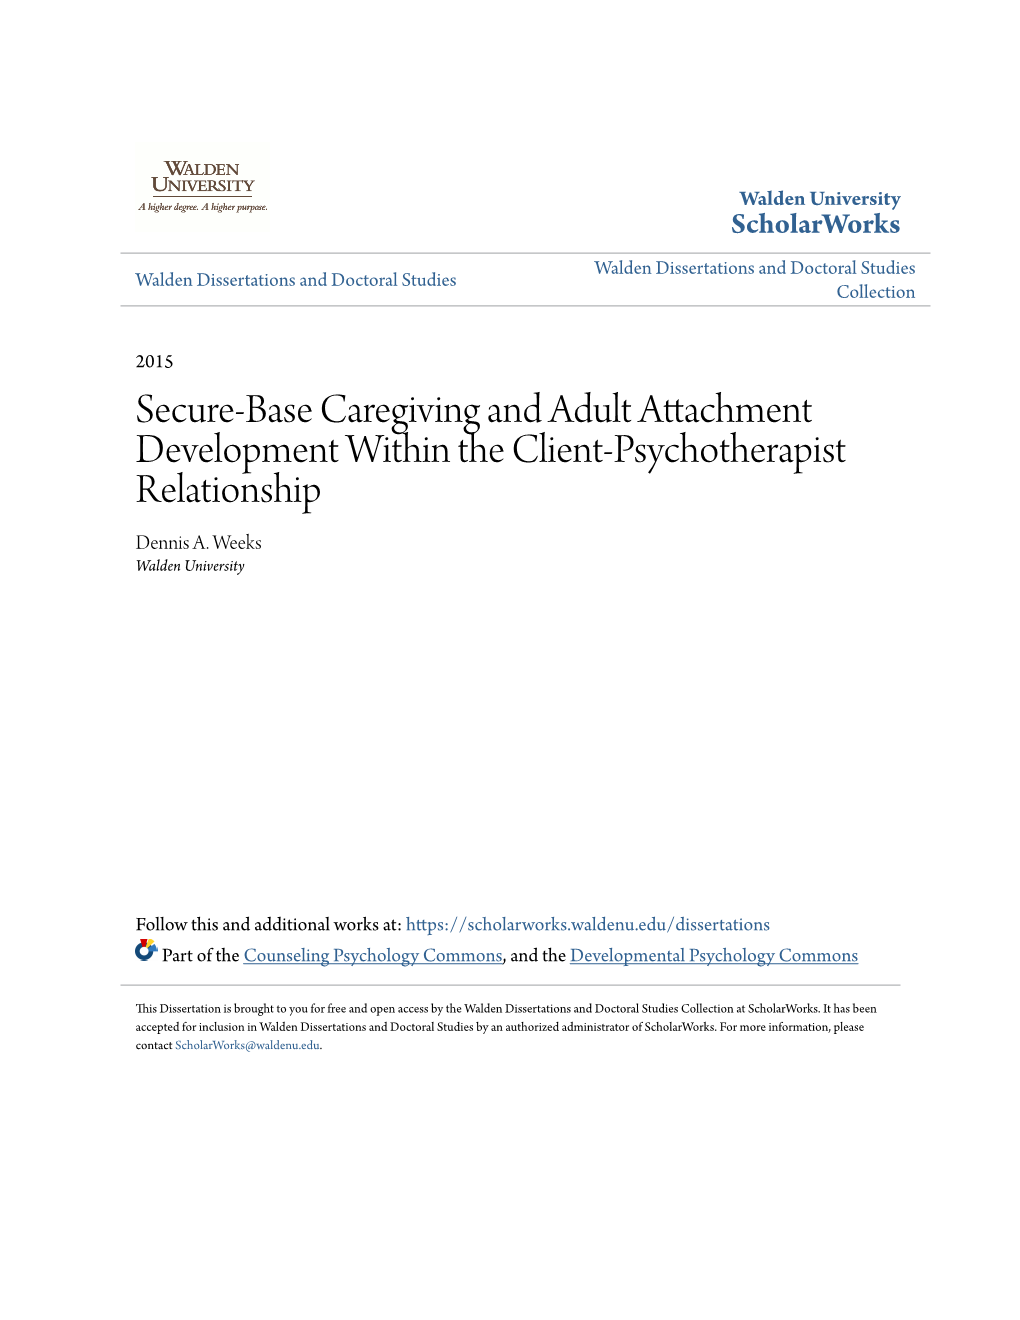 Secure-Base Caregiving and Adult Attachment Development Within the Client-Psychotherapist Relationship Dennis A